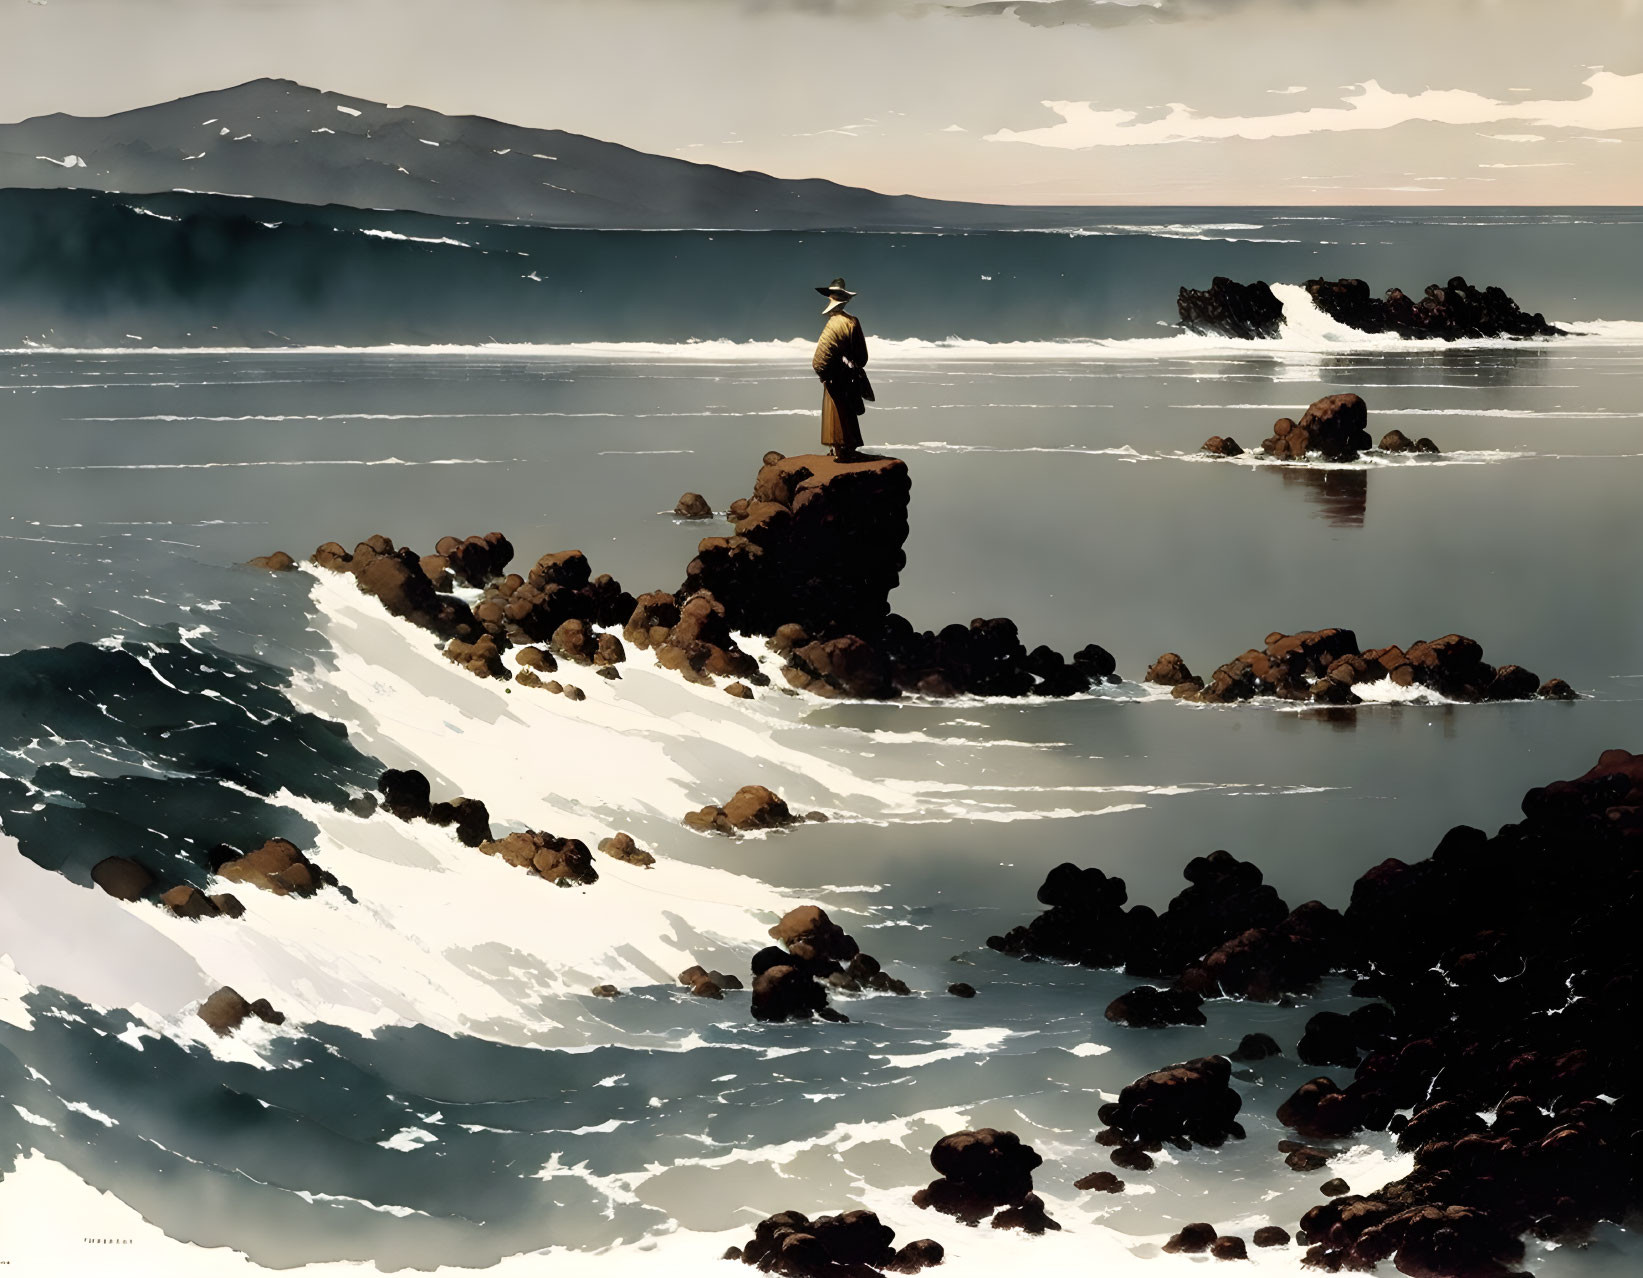 Solitary figure on rocky outcrop gazes at sea with crashing waves and distant mountain.